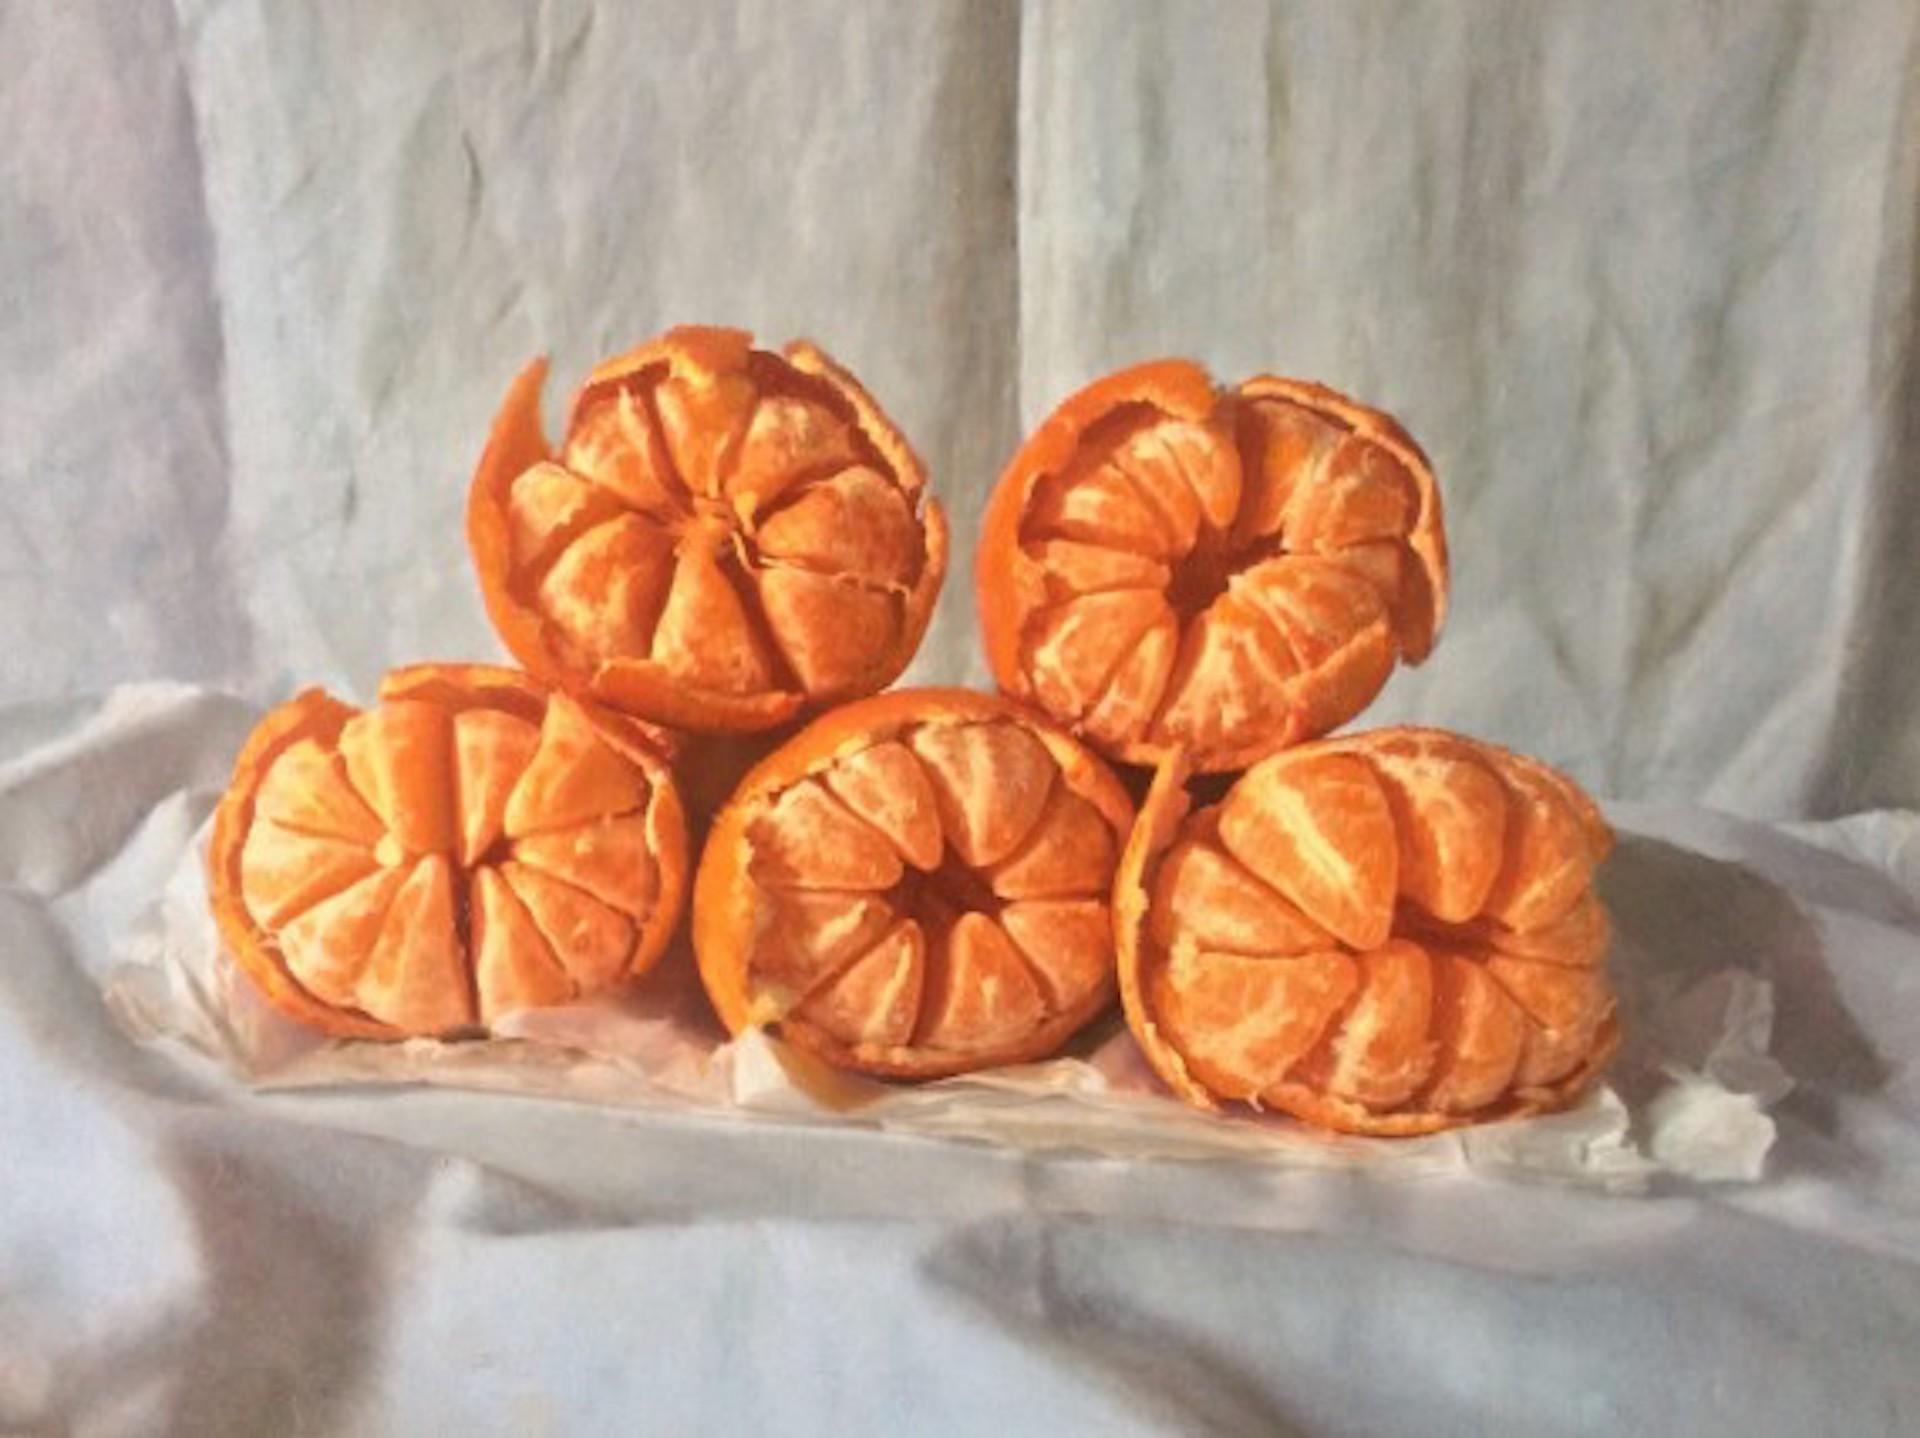 Five Satsumas [2020]
Original
Still Life
Oil Paint on Board
Complete Size of Unframed Work: H:15 cm x W:20 cm x D:2.5cm
Frame Size: H:21 cm x W:26 cm x D:5.5cm
Sold Framed
Please note that insitu images are purely an indication of how a piece may